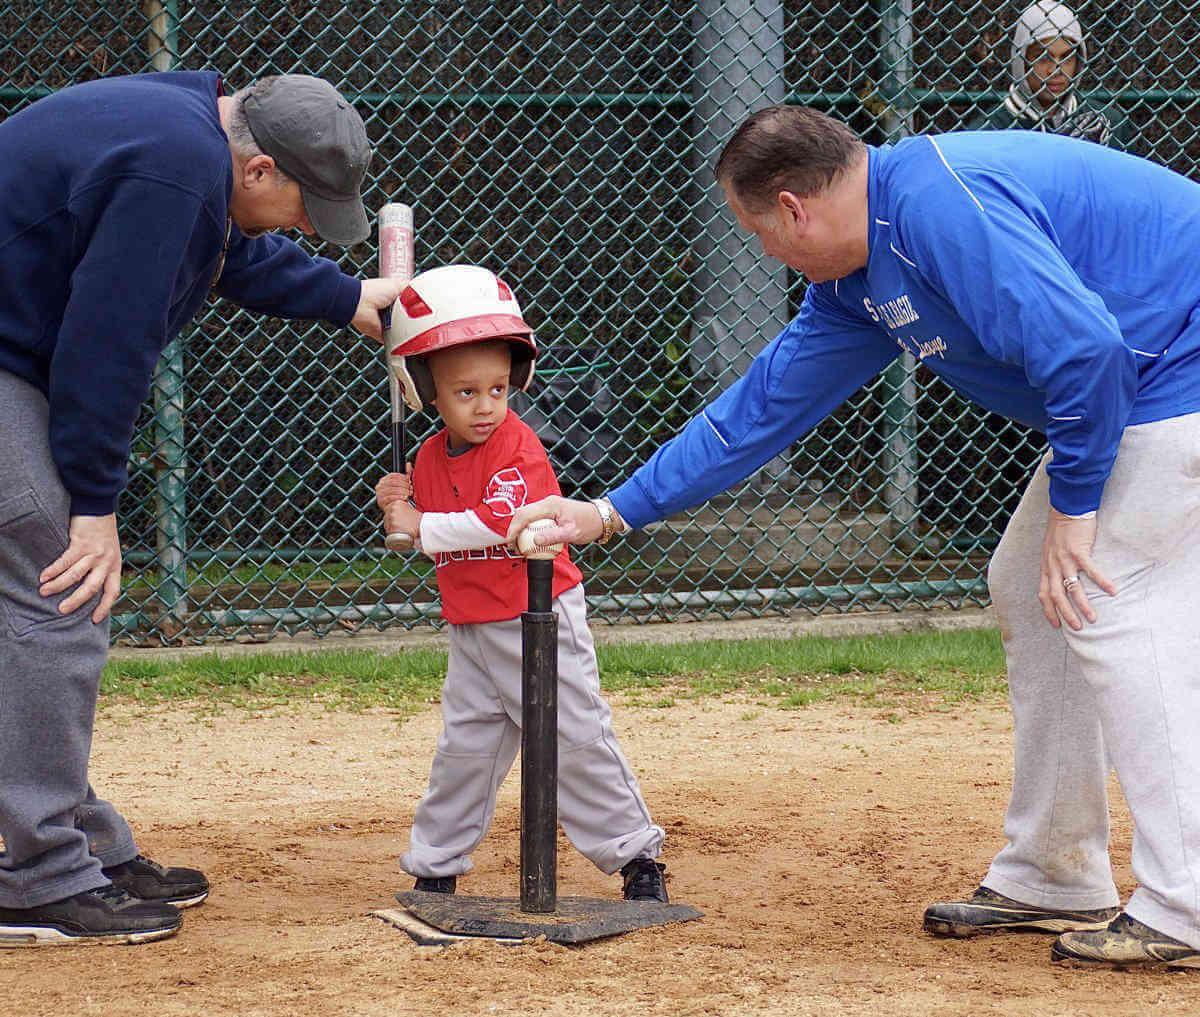 Astor LL Challenger Division Opening Day|Astor LL Challenger Division Opening Day|Astor LL Challenger Division Opening Day|Astor LL Challenger Division Opening Day|Astor LL Challenger Division Opening Day|Astor LL Challenger Division Opening Day